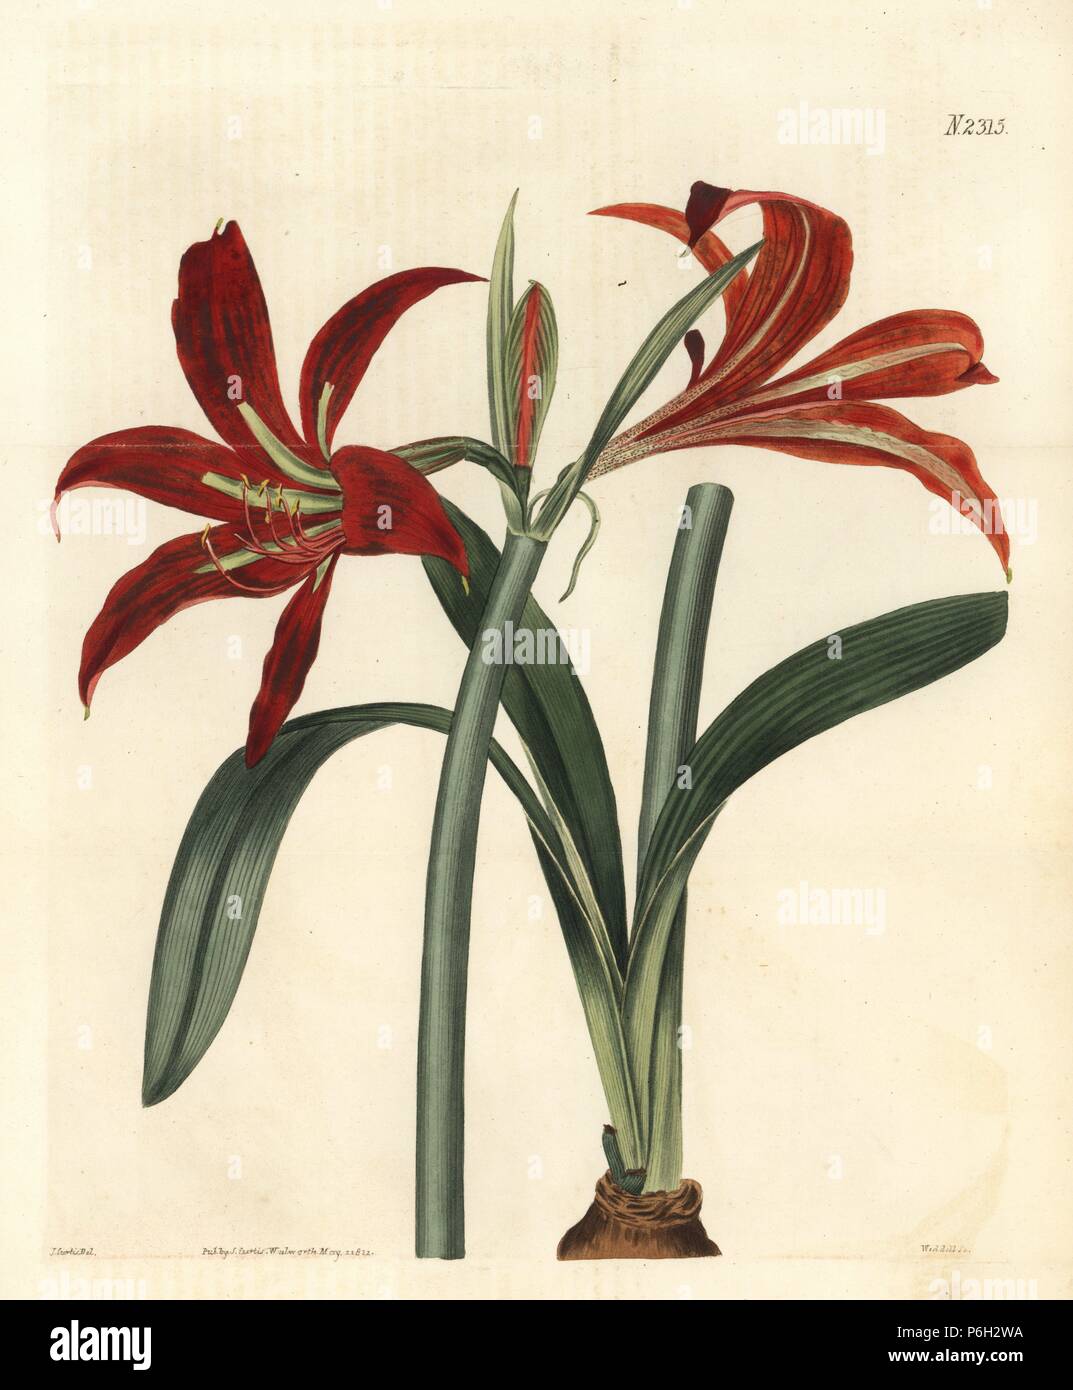 Barbados or Easter lily hybrid, Hippeastrum puniceum hybridum (Hybrid long-spathed knight's star lily, Hippeastrum spathaceum hybridum). Handcoloured copperplate engraving by Weddell after an illustration by John Curtis from Samuel Curtis's "Botanical Magazine," London, 1822. Stock Photo